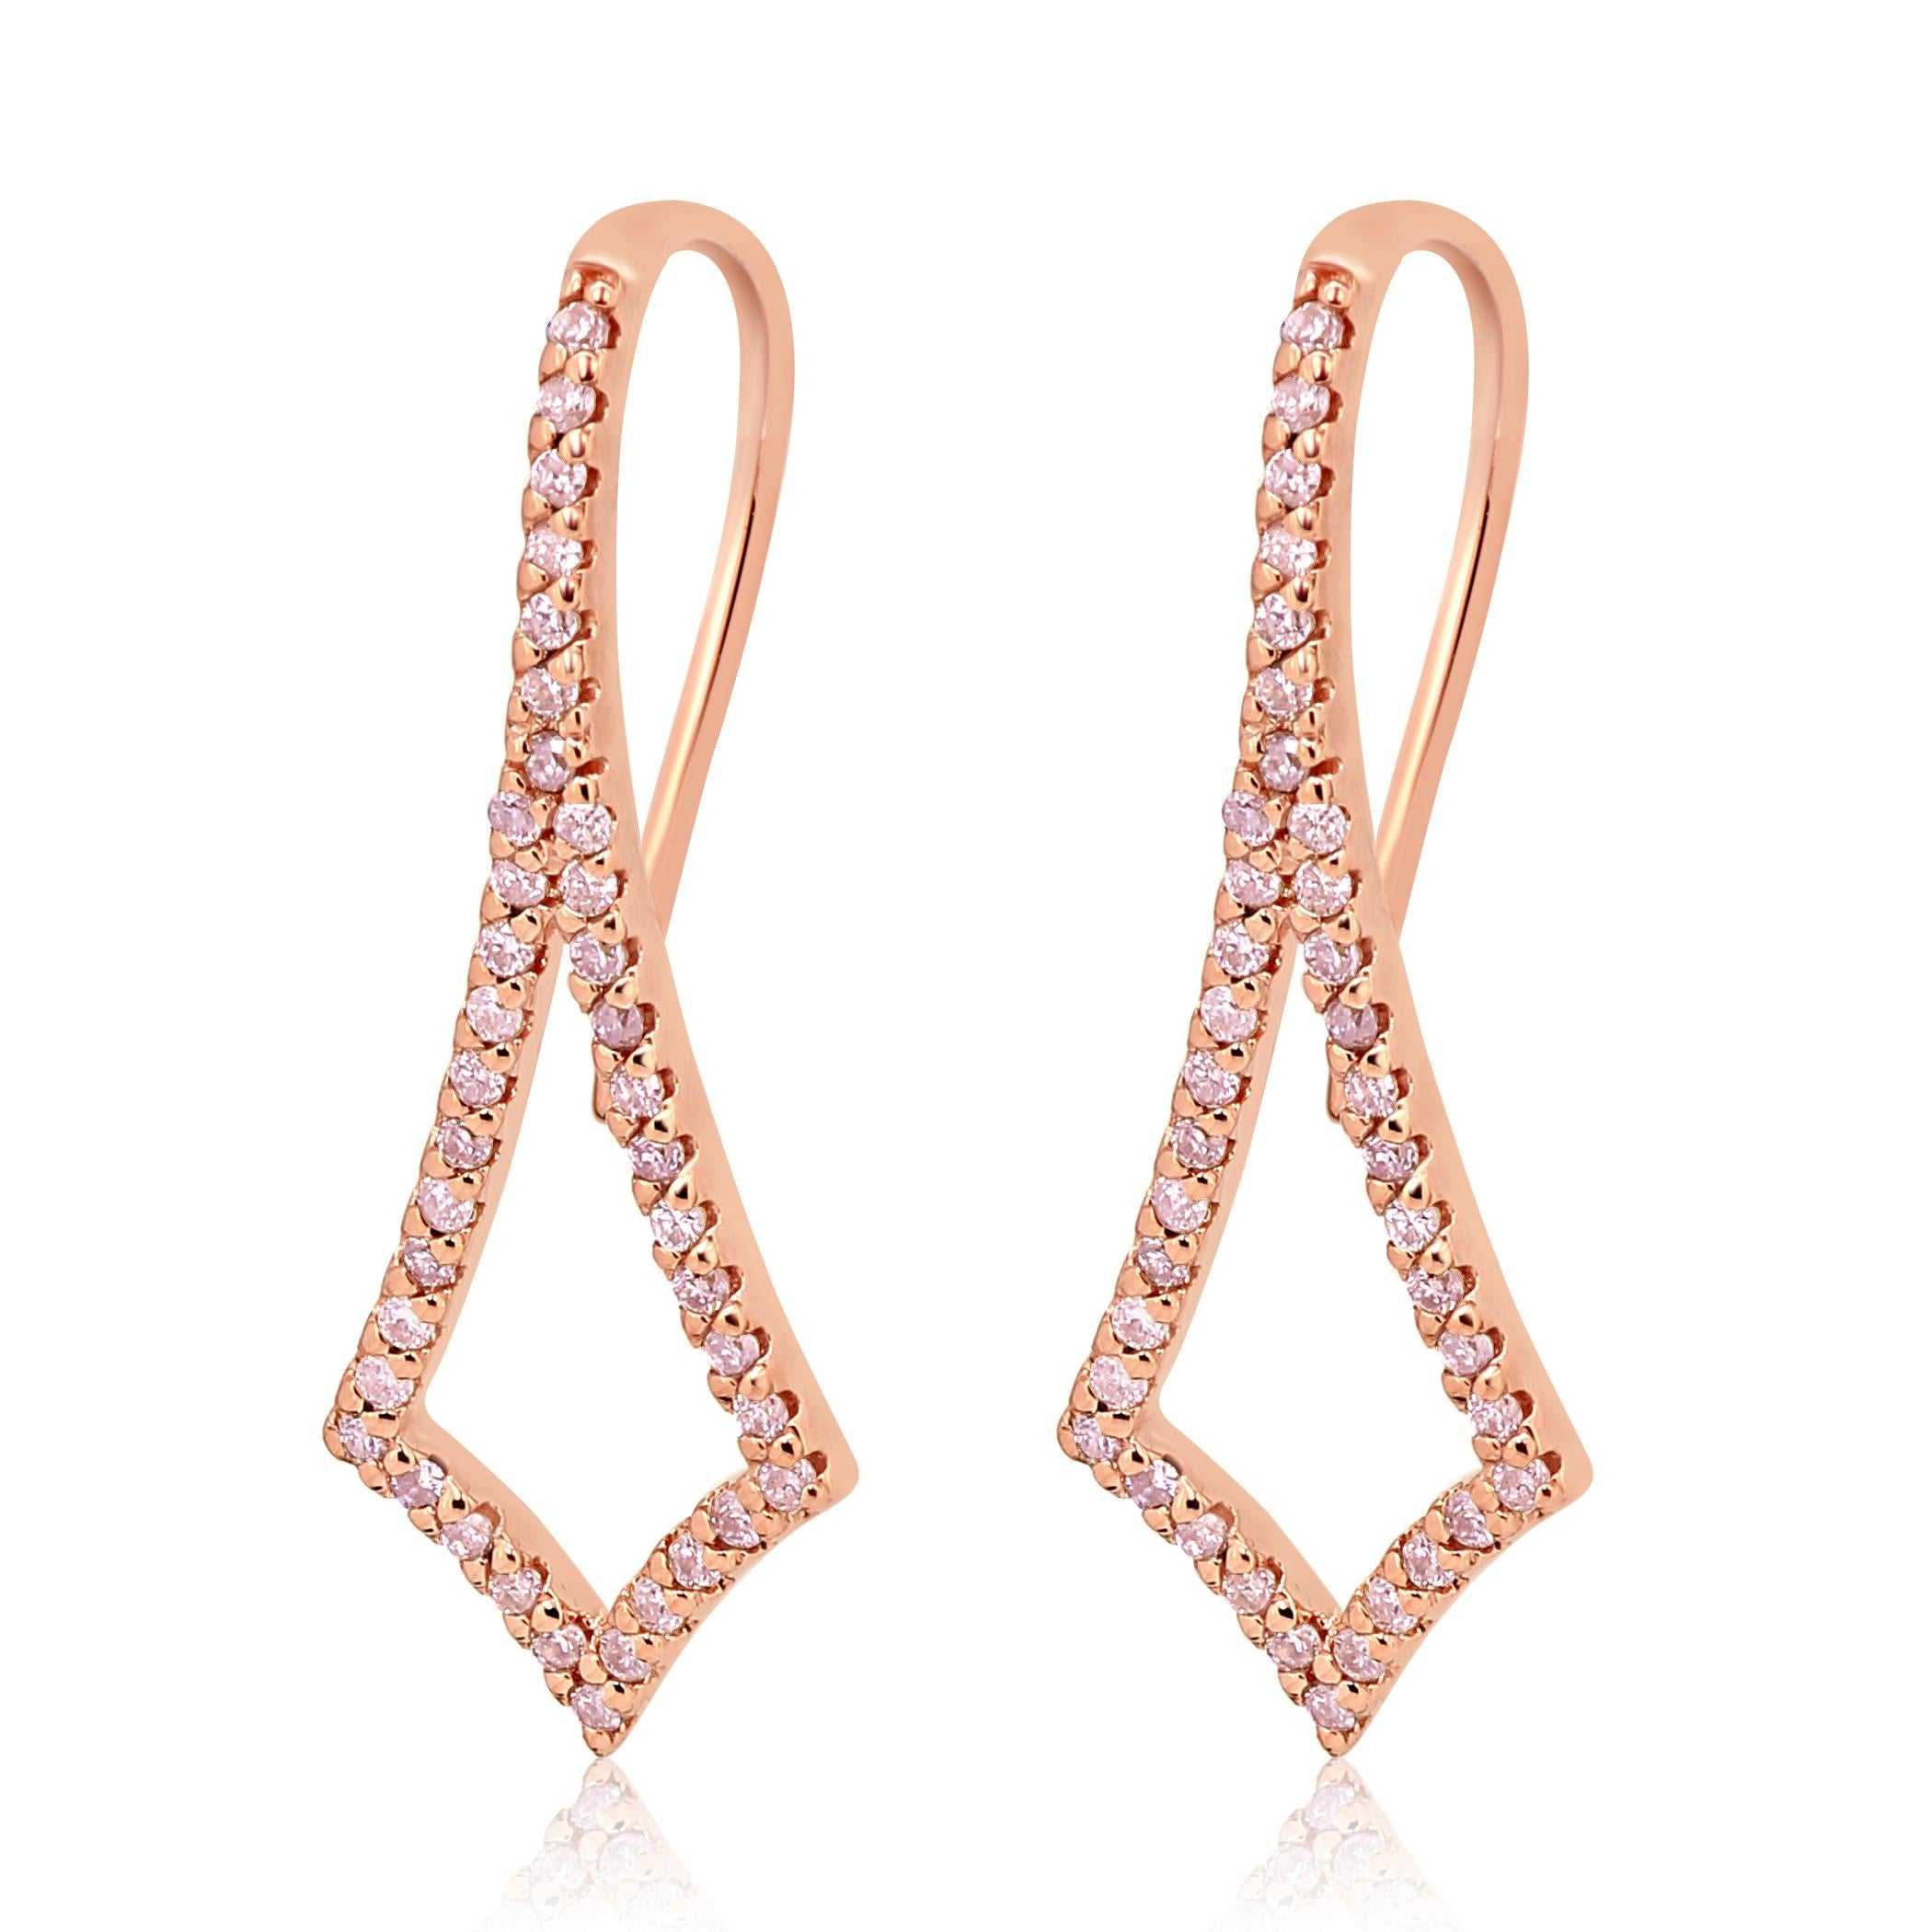 Natural Fancy Pink Diamond Rounds SI Clarity 0.46 Caratset in 14K Rose Gold Fashion Dangle Drop Daily Wear Earring.

Total Diamond Weight 0.46 Carat